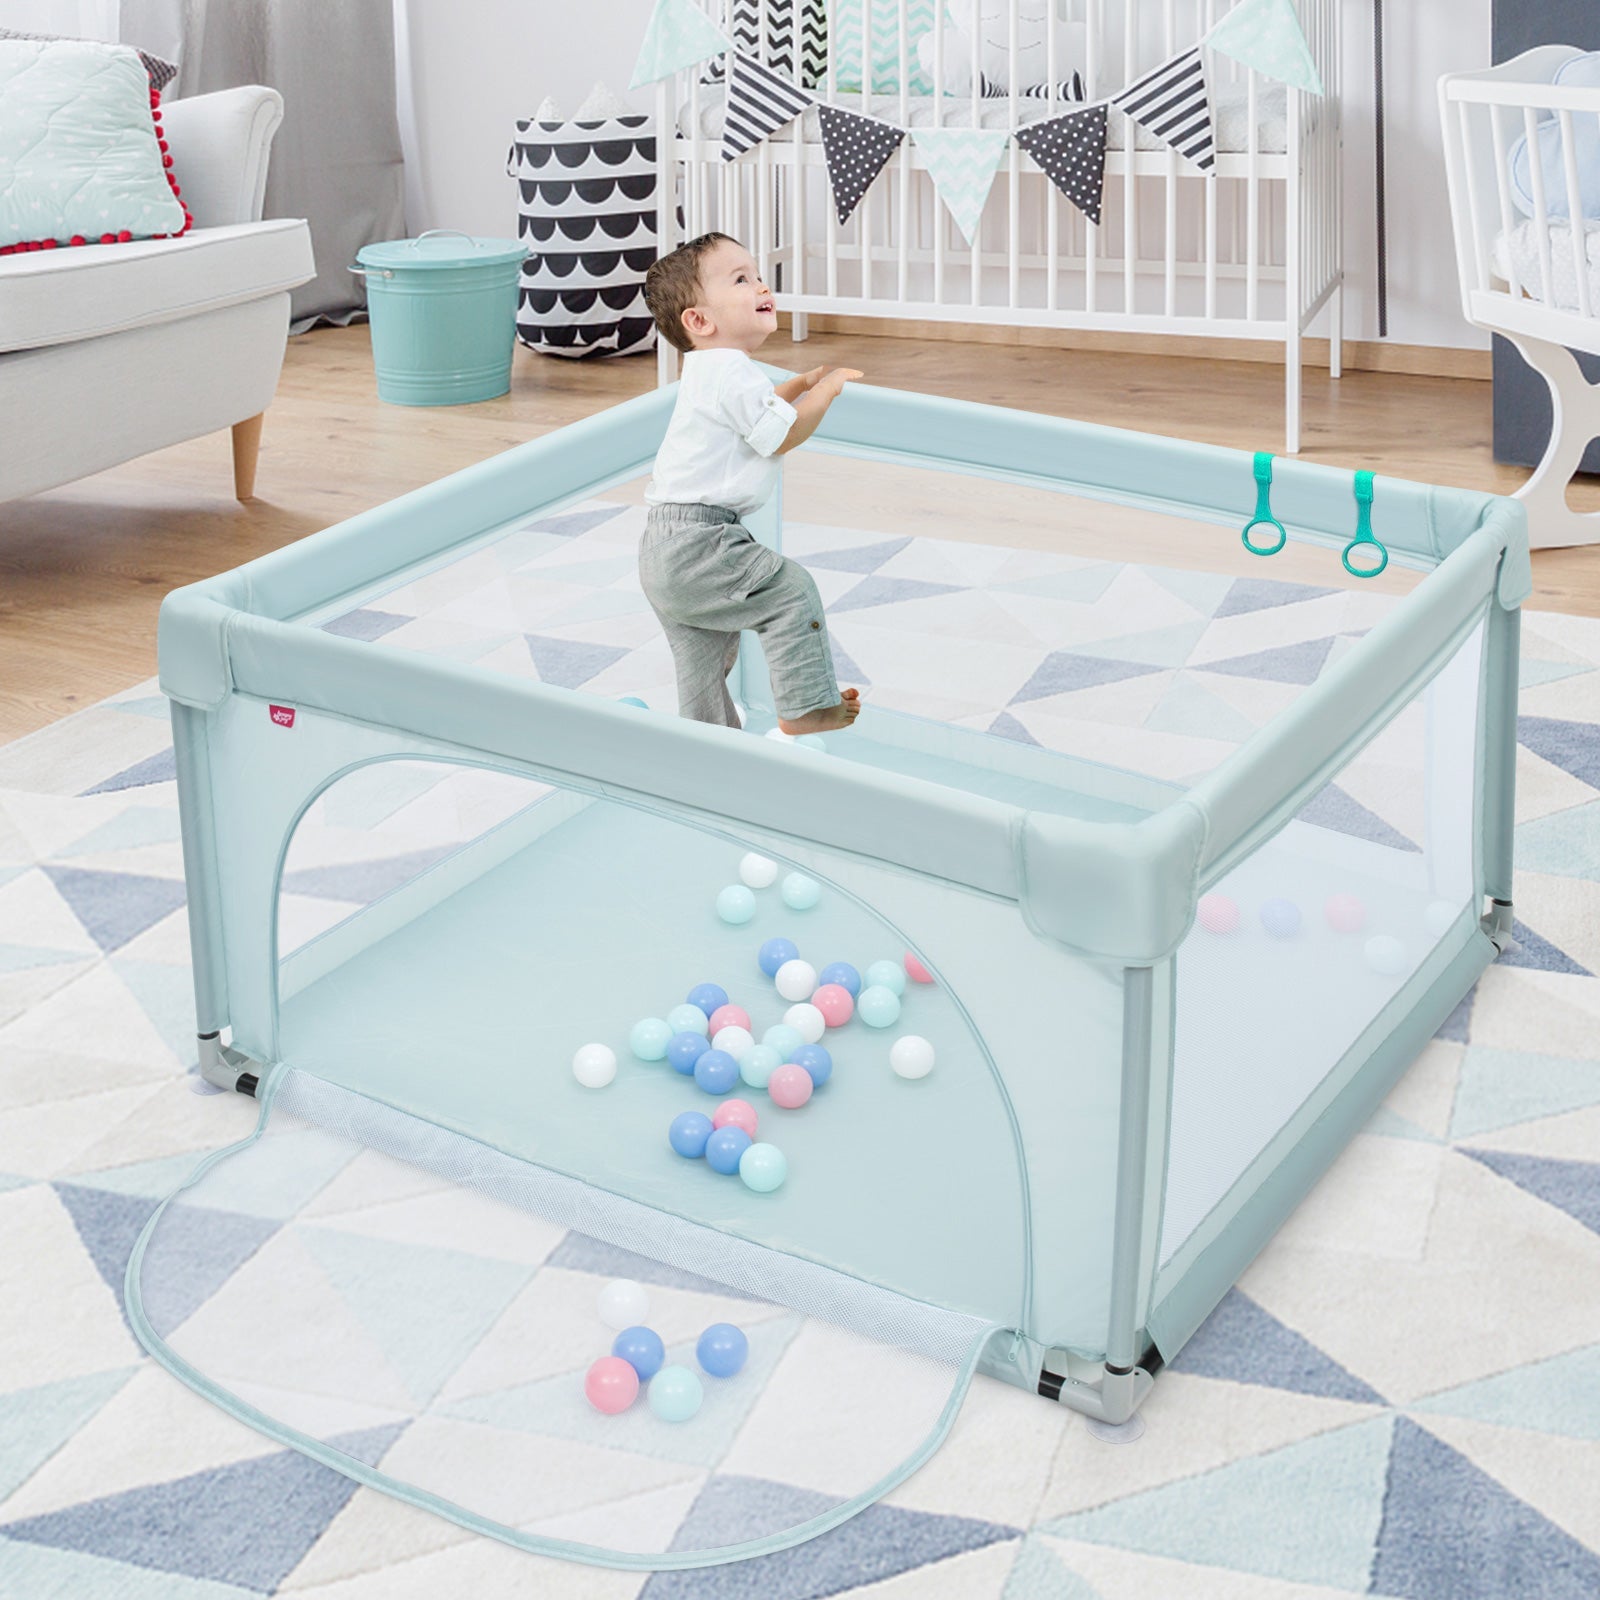 Baby Playpen Activity Fence - Fun and Safety in Blue